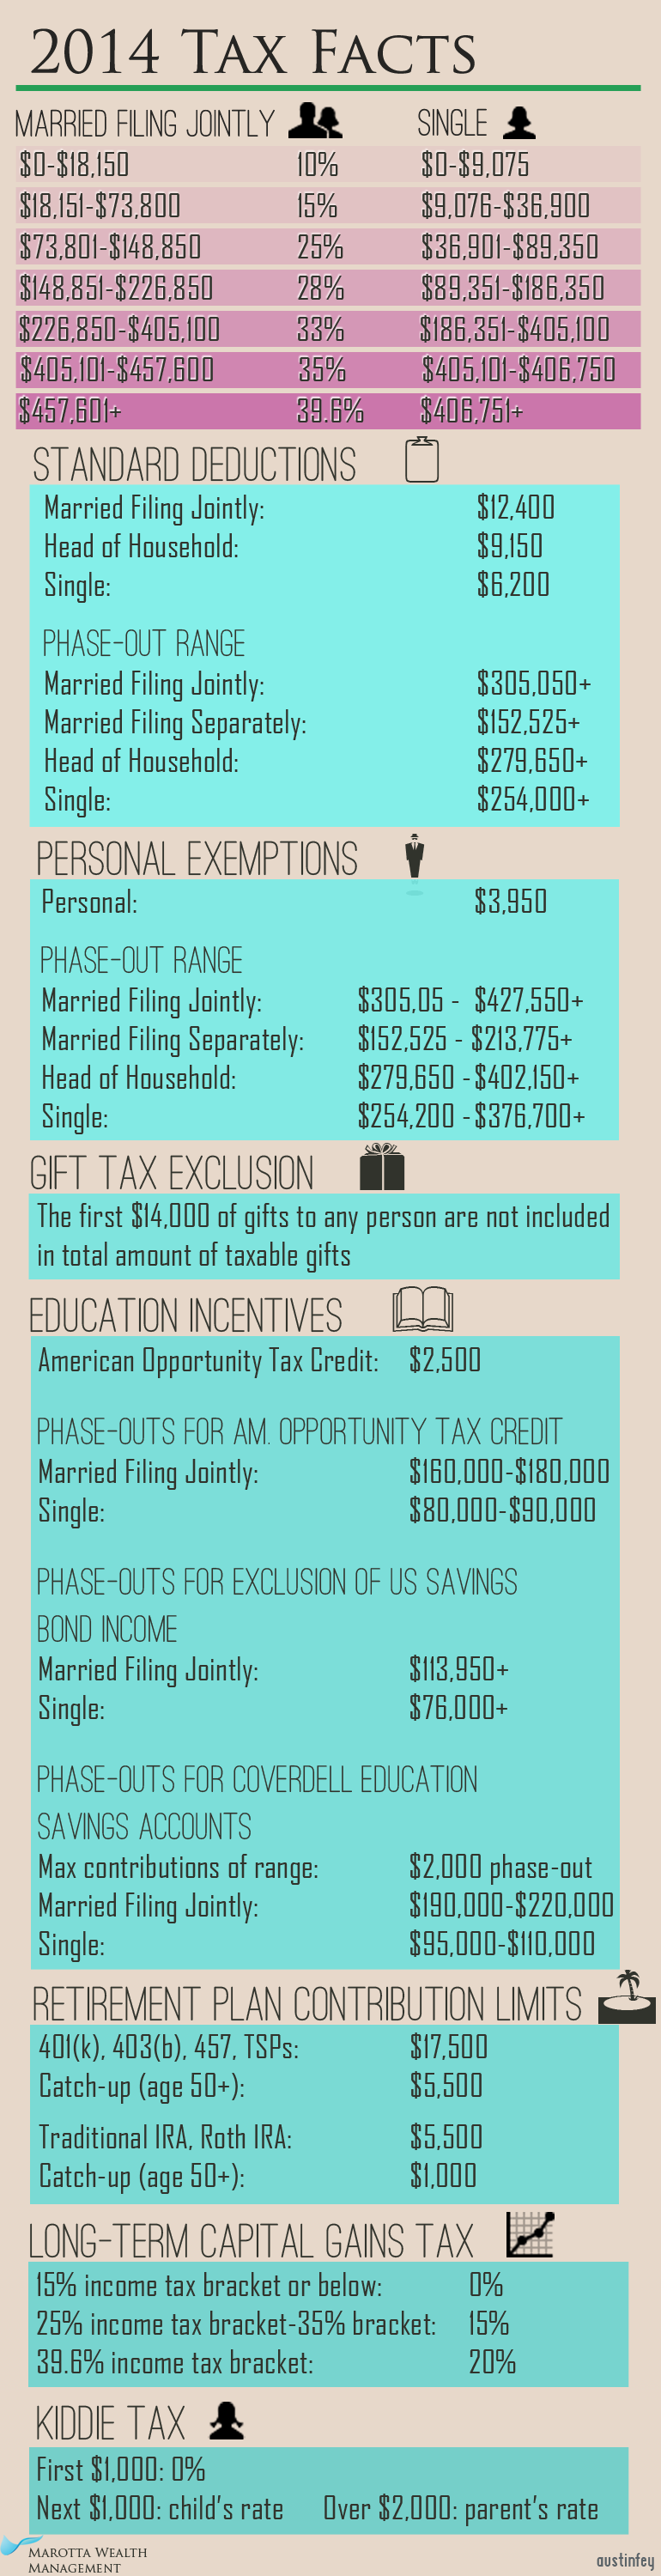 2014 Tax Facts